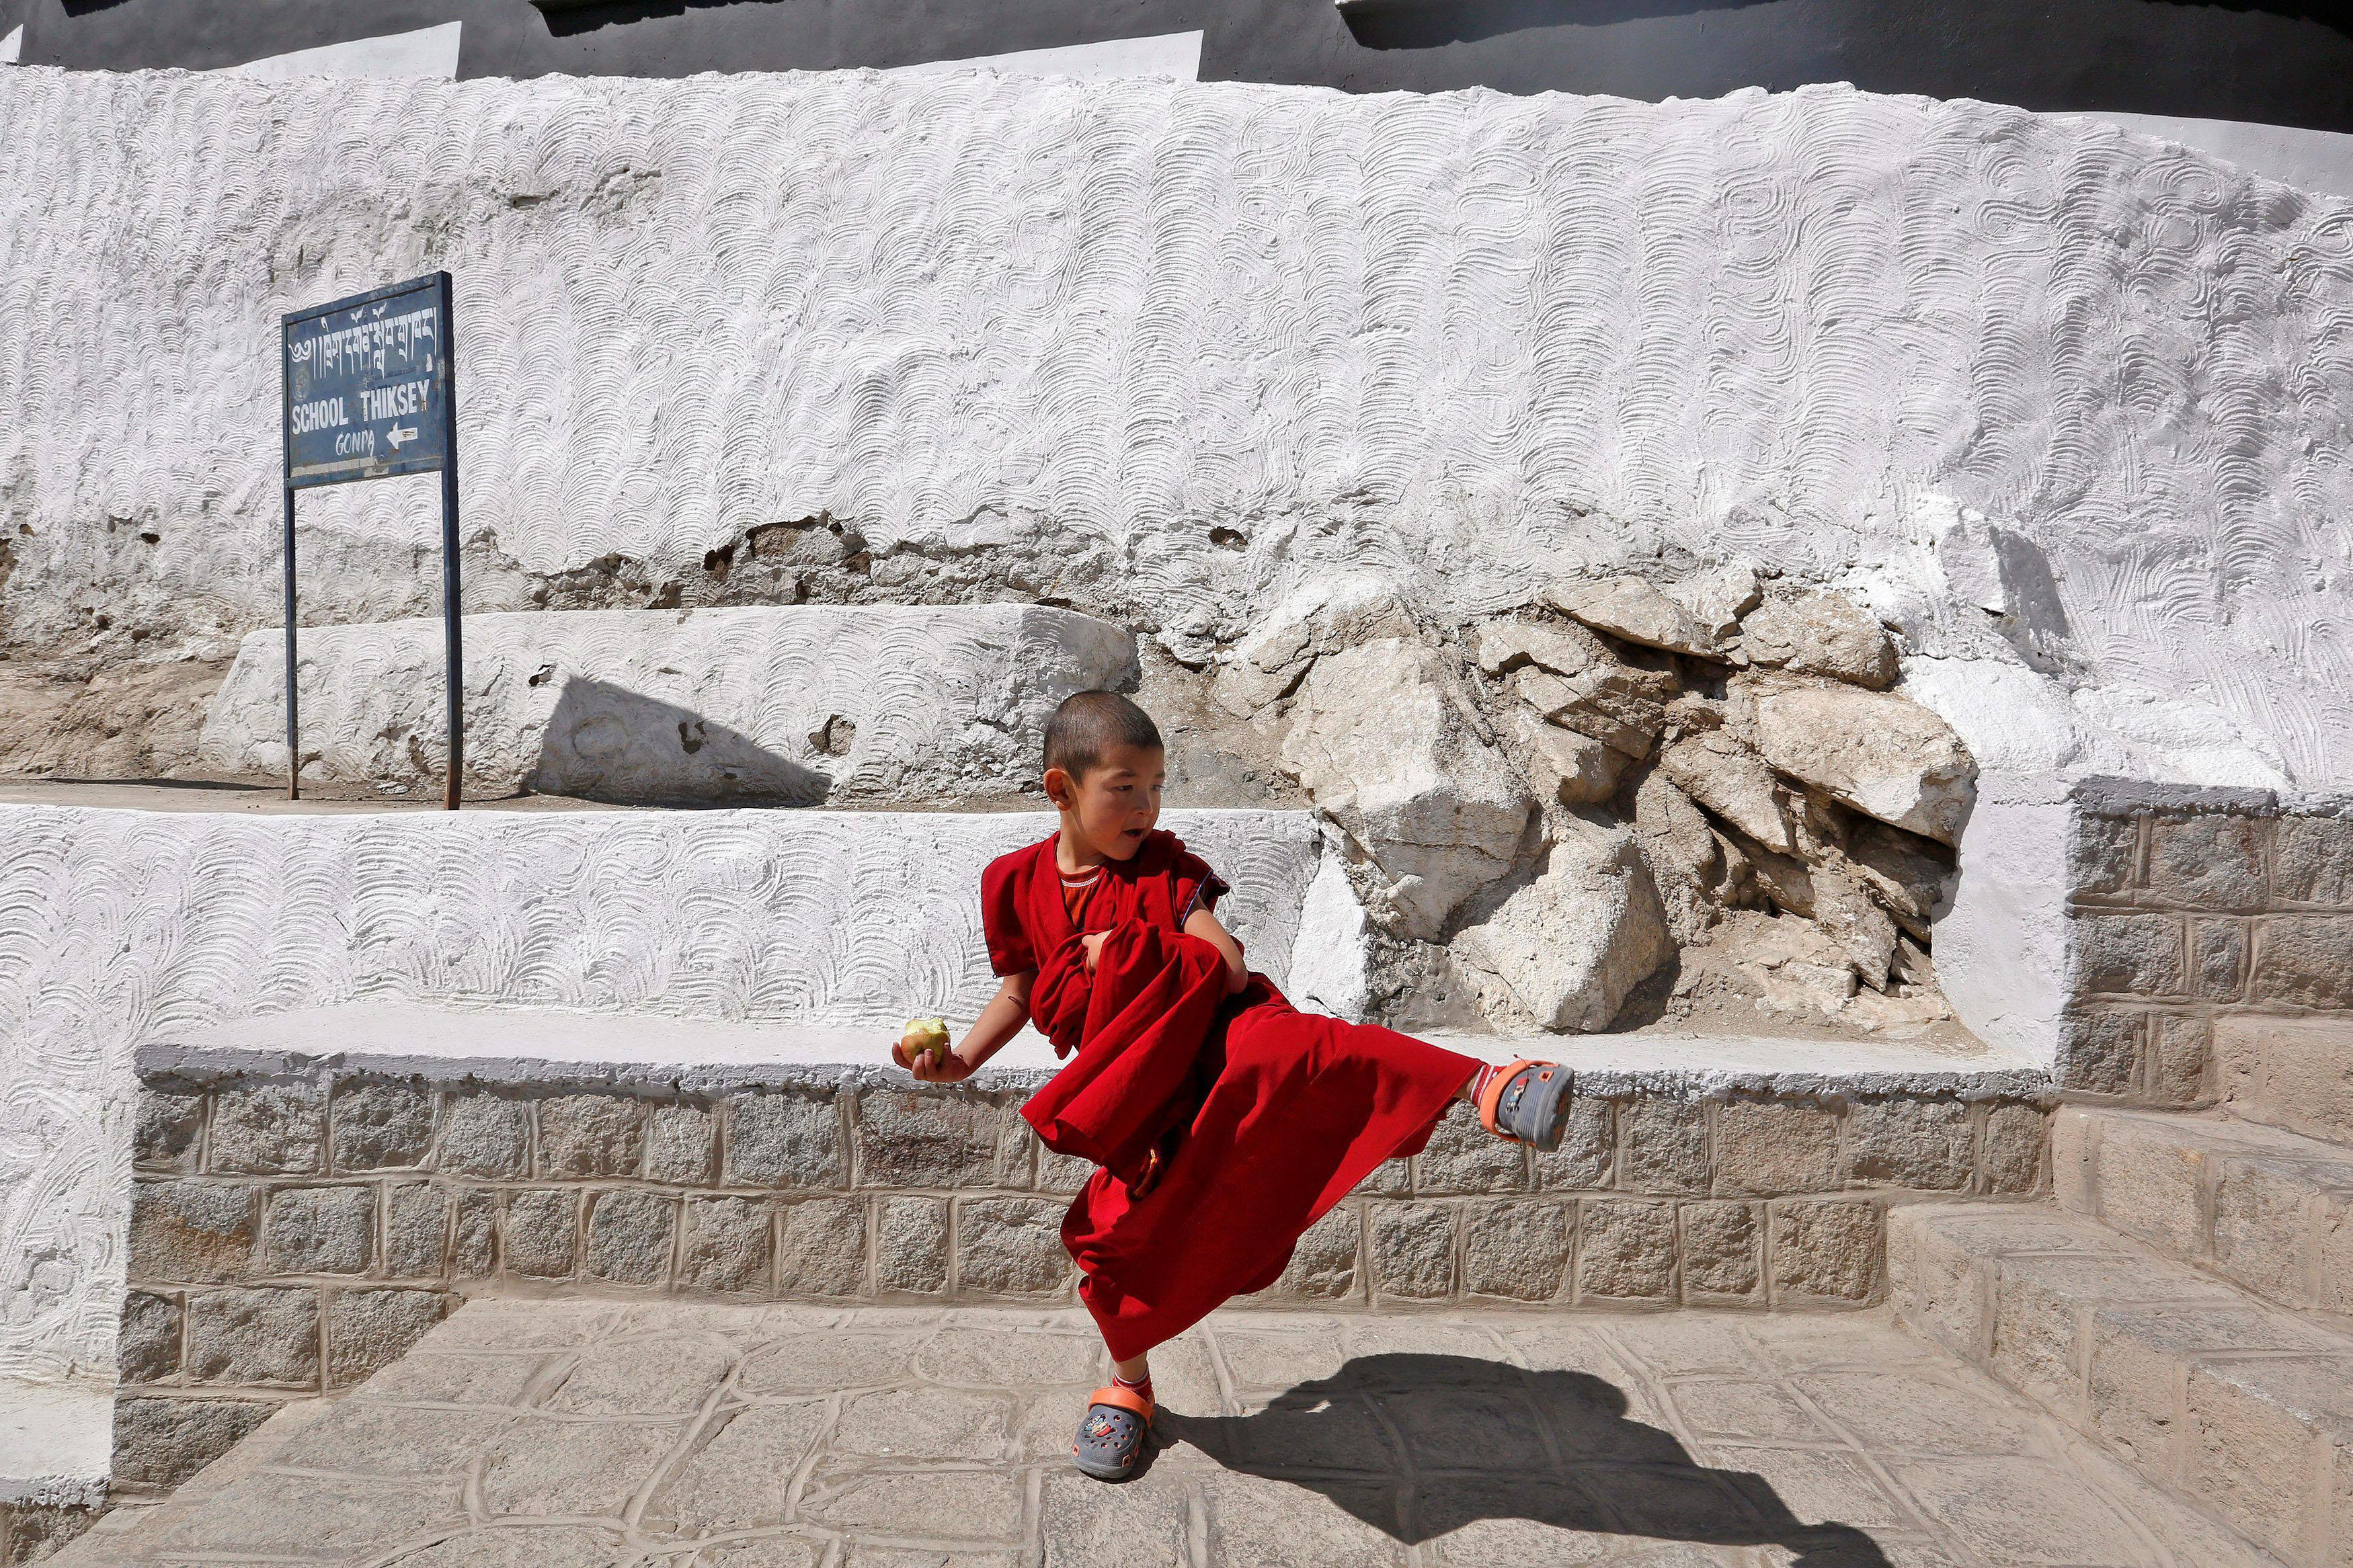 The Wider Image: Child monks in the Indian Himalayas